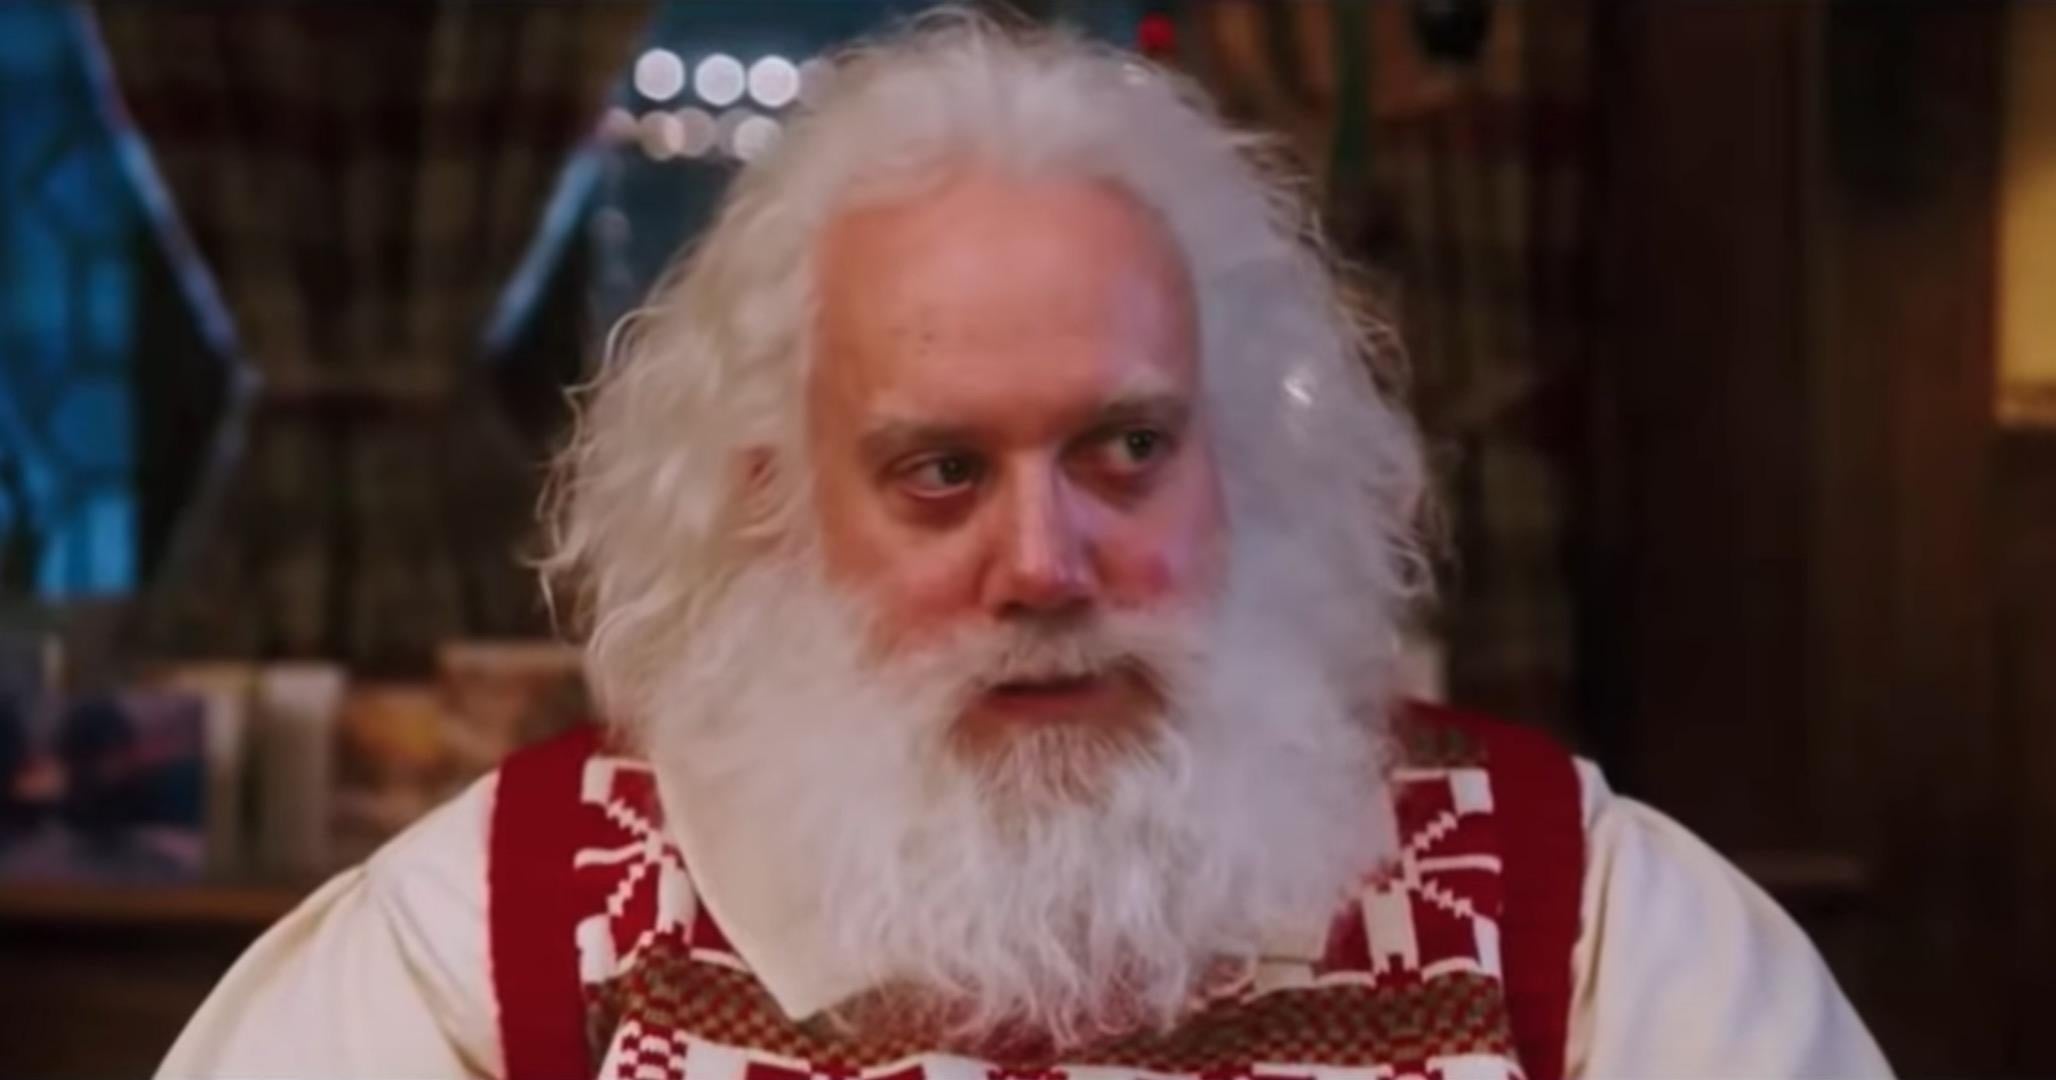 Santa Claus Film Portrayals Ranked By Authenticity From